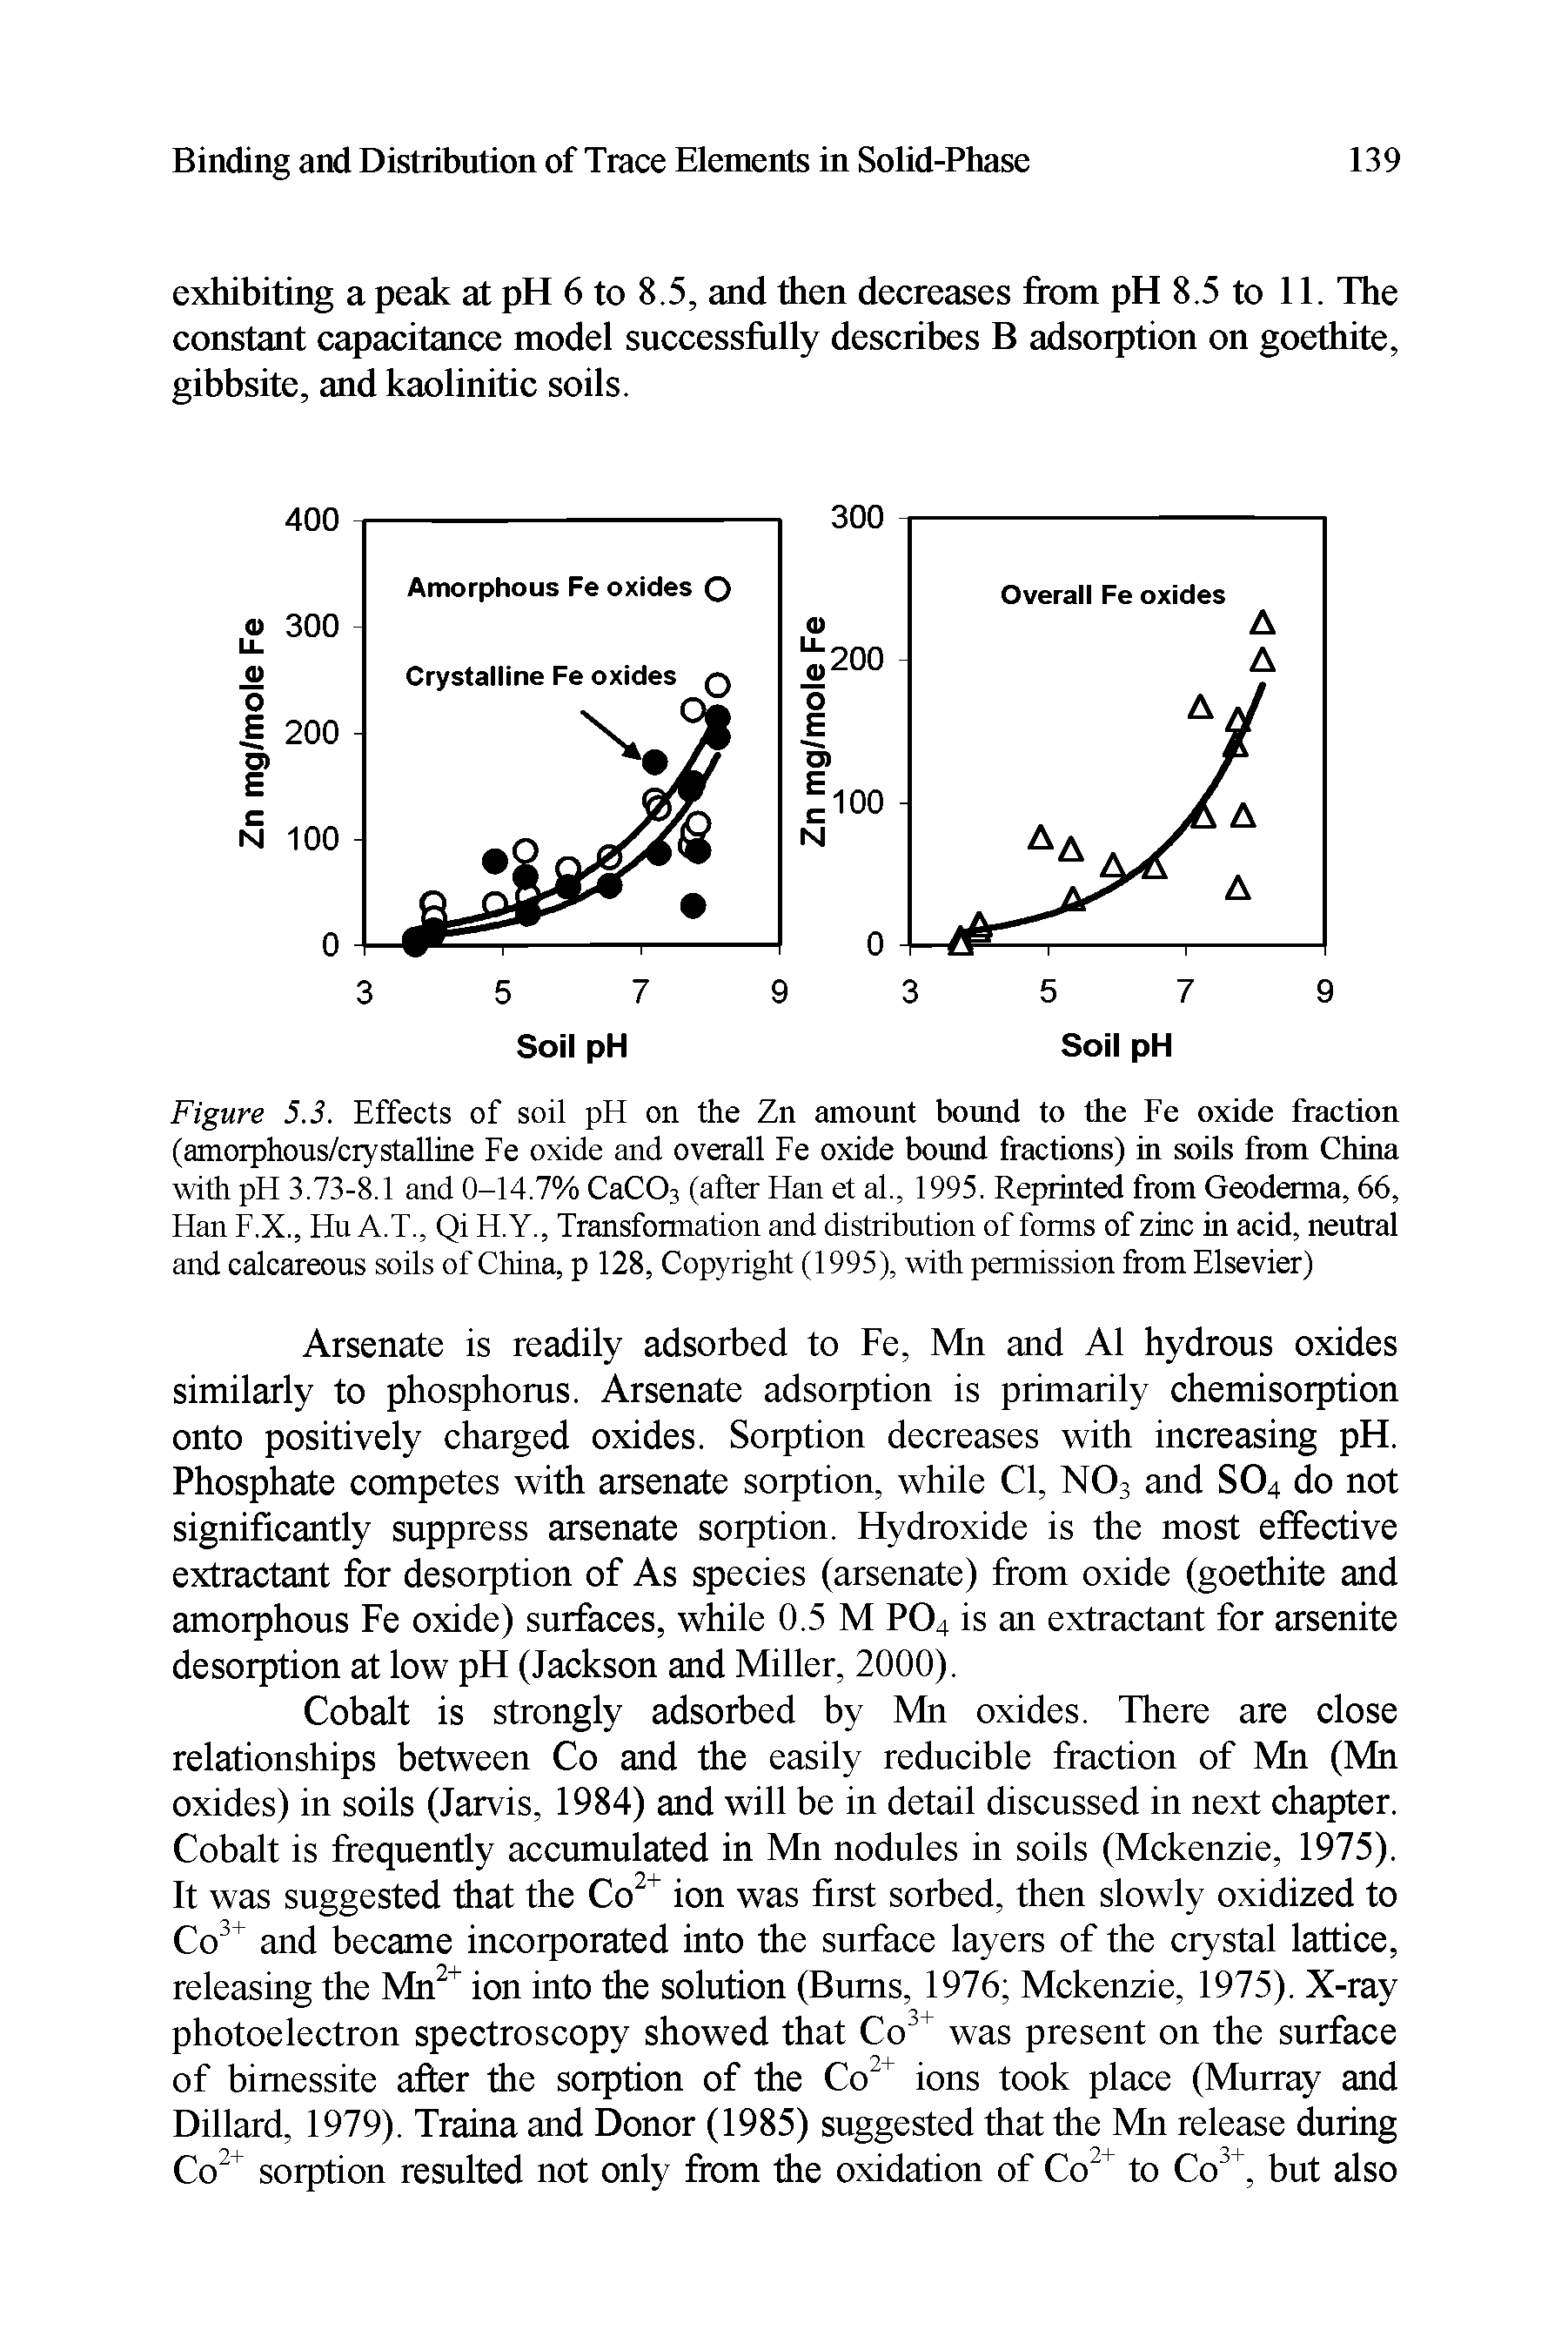 Figure 5.3. Effects of soil pH on the Zn amount bound to the Fe oxide fraction (amorphous/crystalline Fe oxide and overall Fe oxide bound fractions) in soils from China with pH 3.73-8.1 and 0-14.7% CaC03 (after Han et al., 1995. Reprinted from Geoderma, 66, Han F.X., Hu A.T., Qi H.Y., Transformation and distribution of forms of zinc in acid, neutral and calcareous soils of China, p 128, Copyright (1995), with permission from Elsevier)...